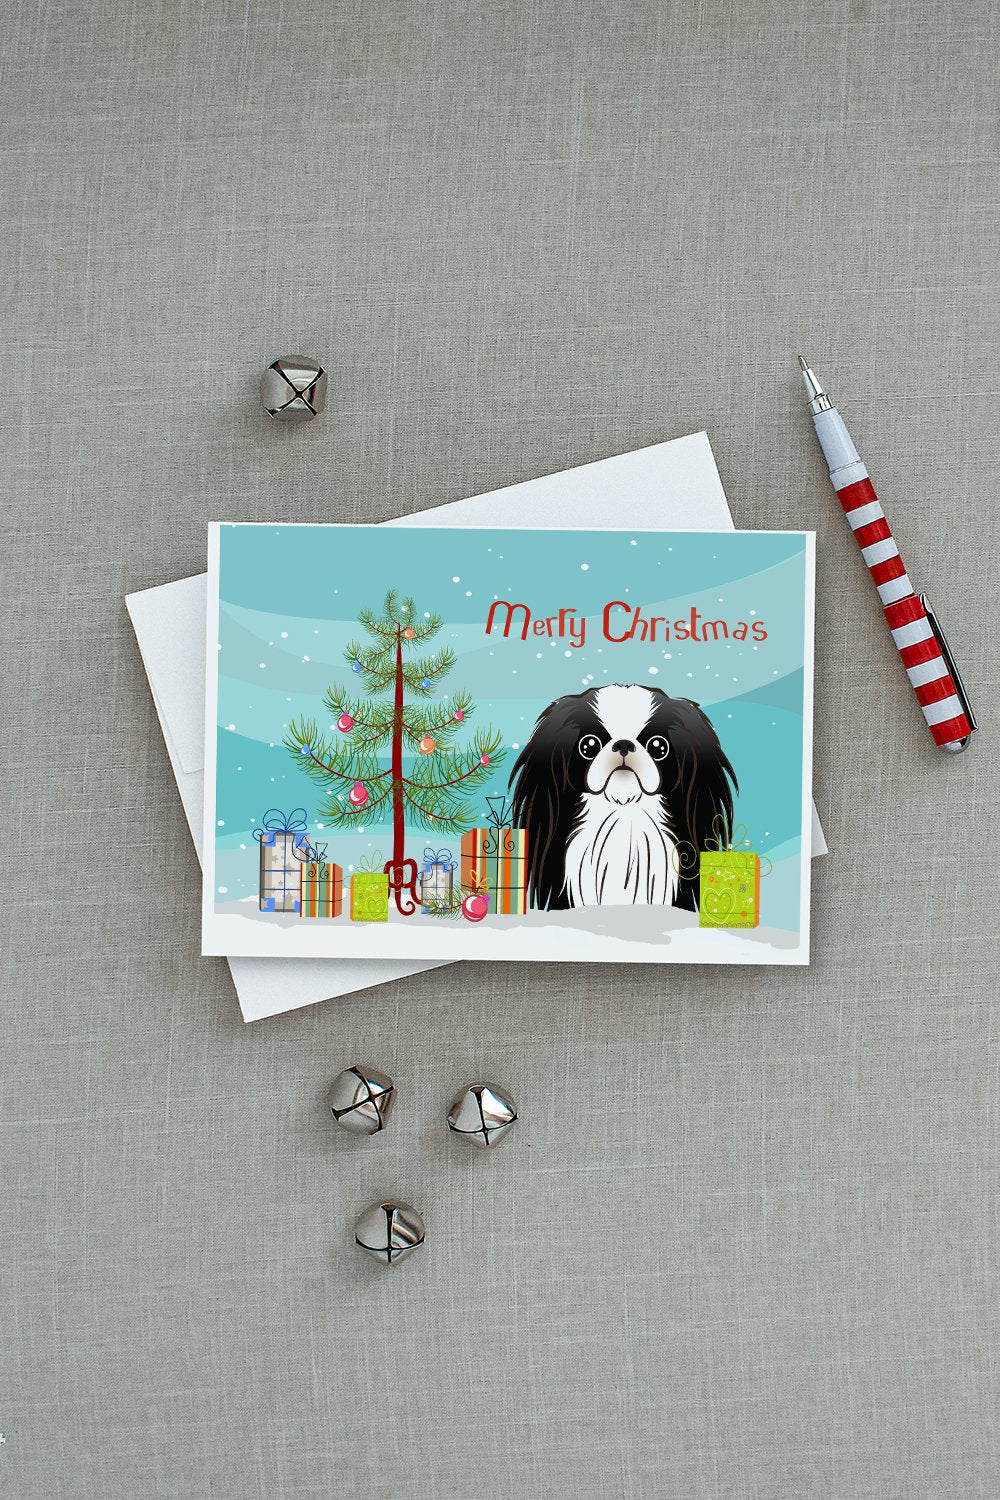 Christmas Tree and Japanese Chin Greeting Cards and Envelopes Pack of 8 - the-store.com